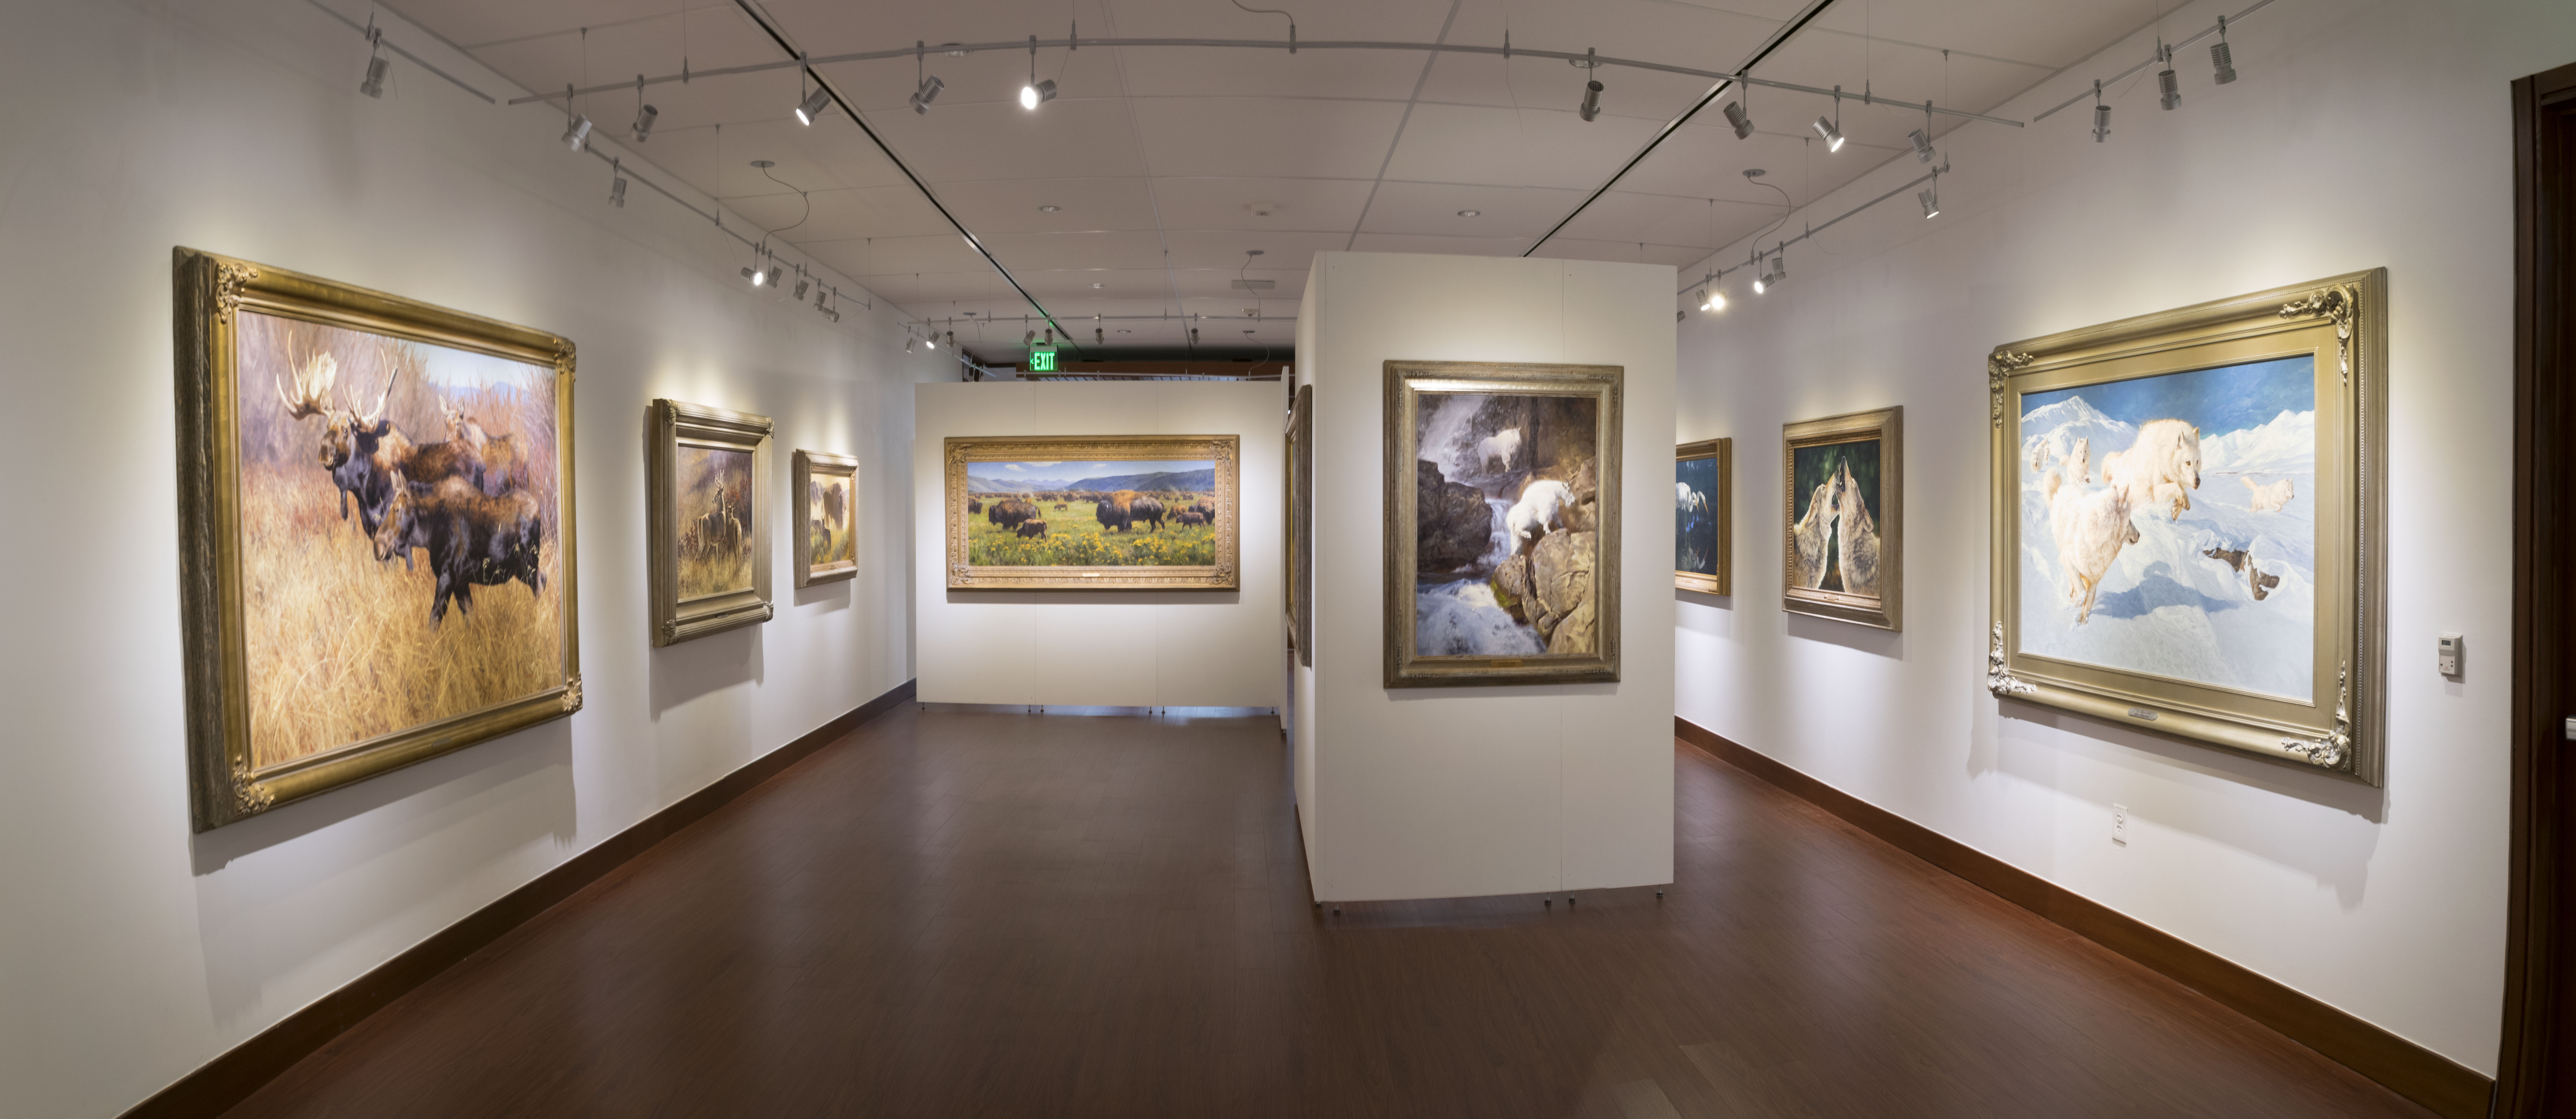 Installation View, Backof Gallery, Creatures of the Wild West: Selections from the Don B. Huntley Collection, 2016.